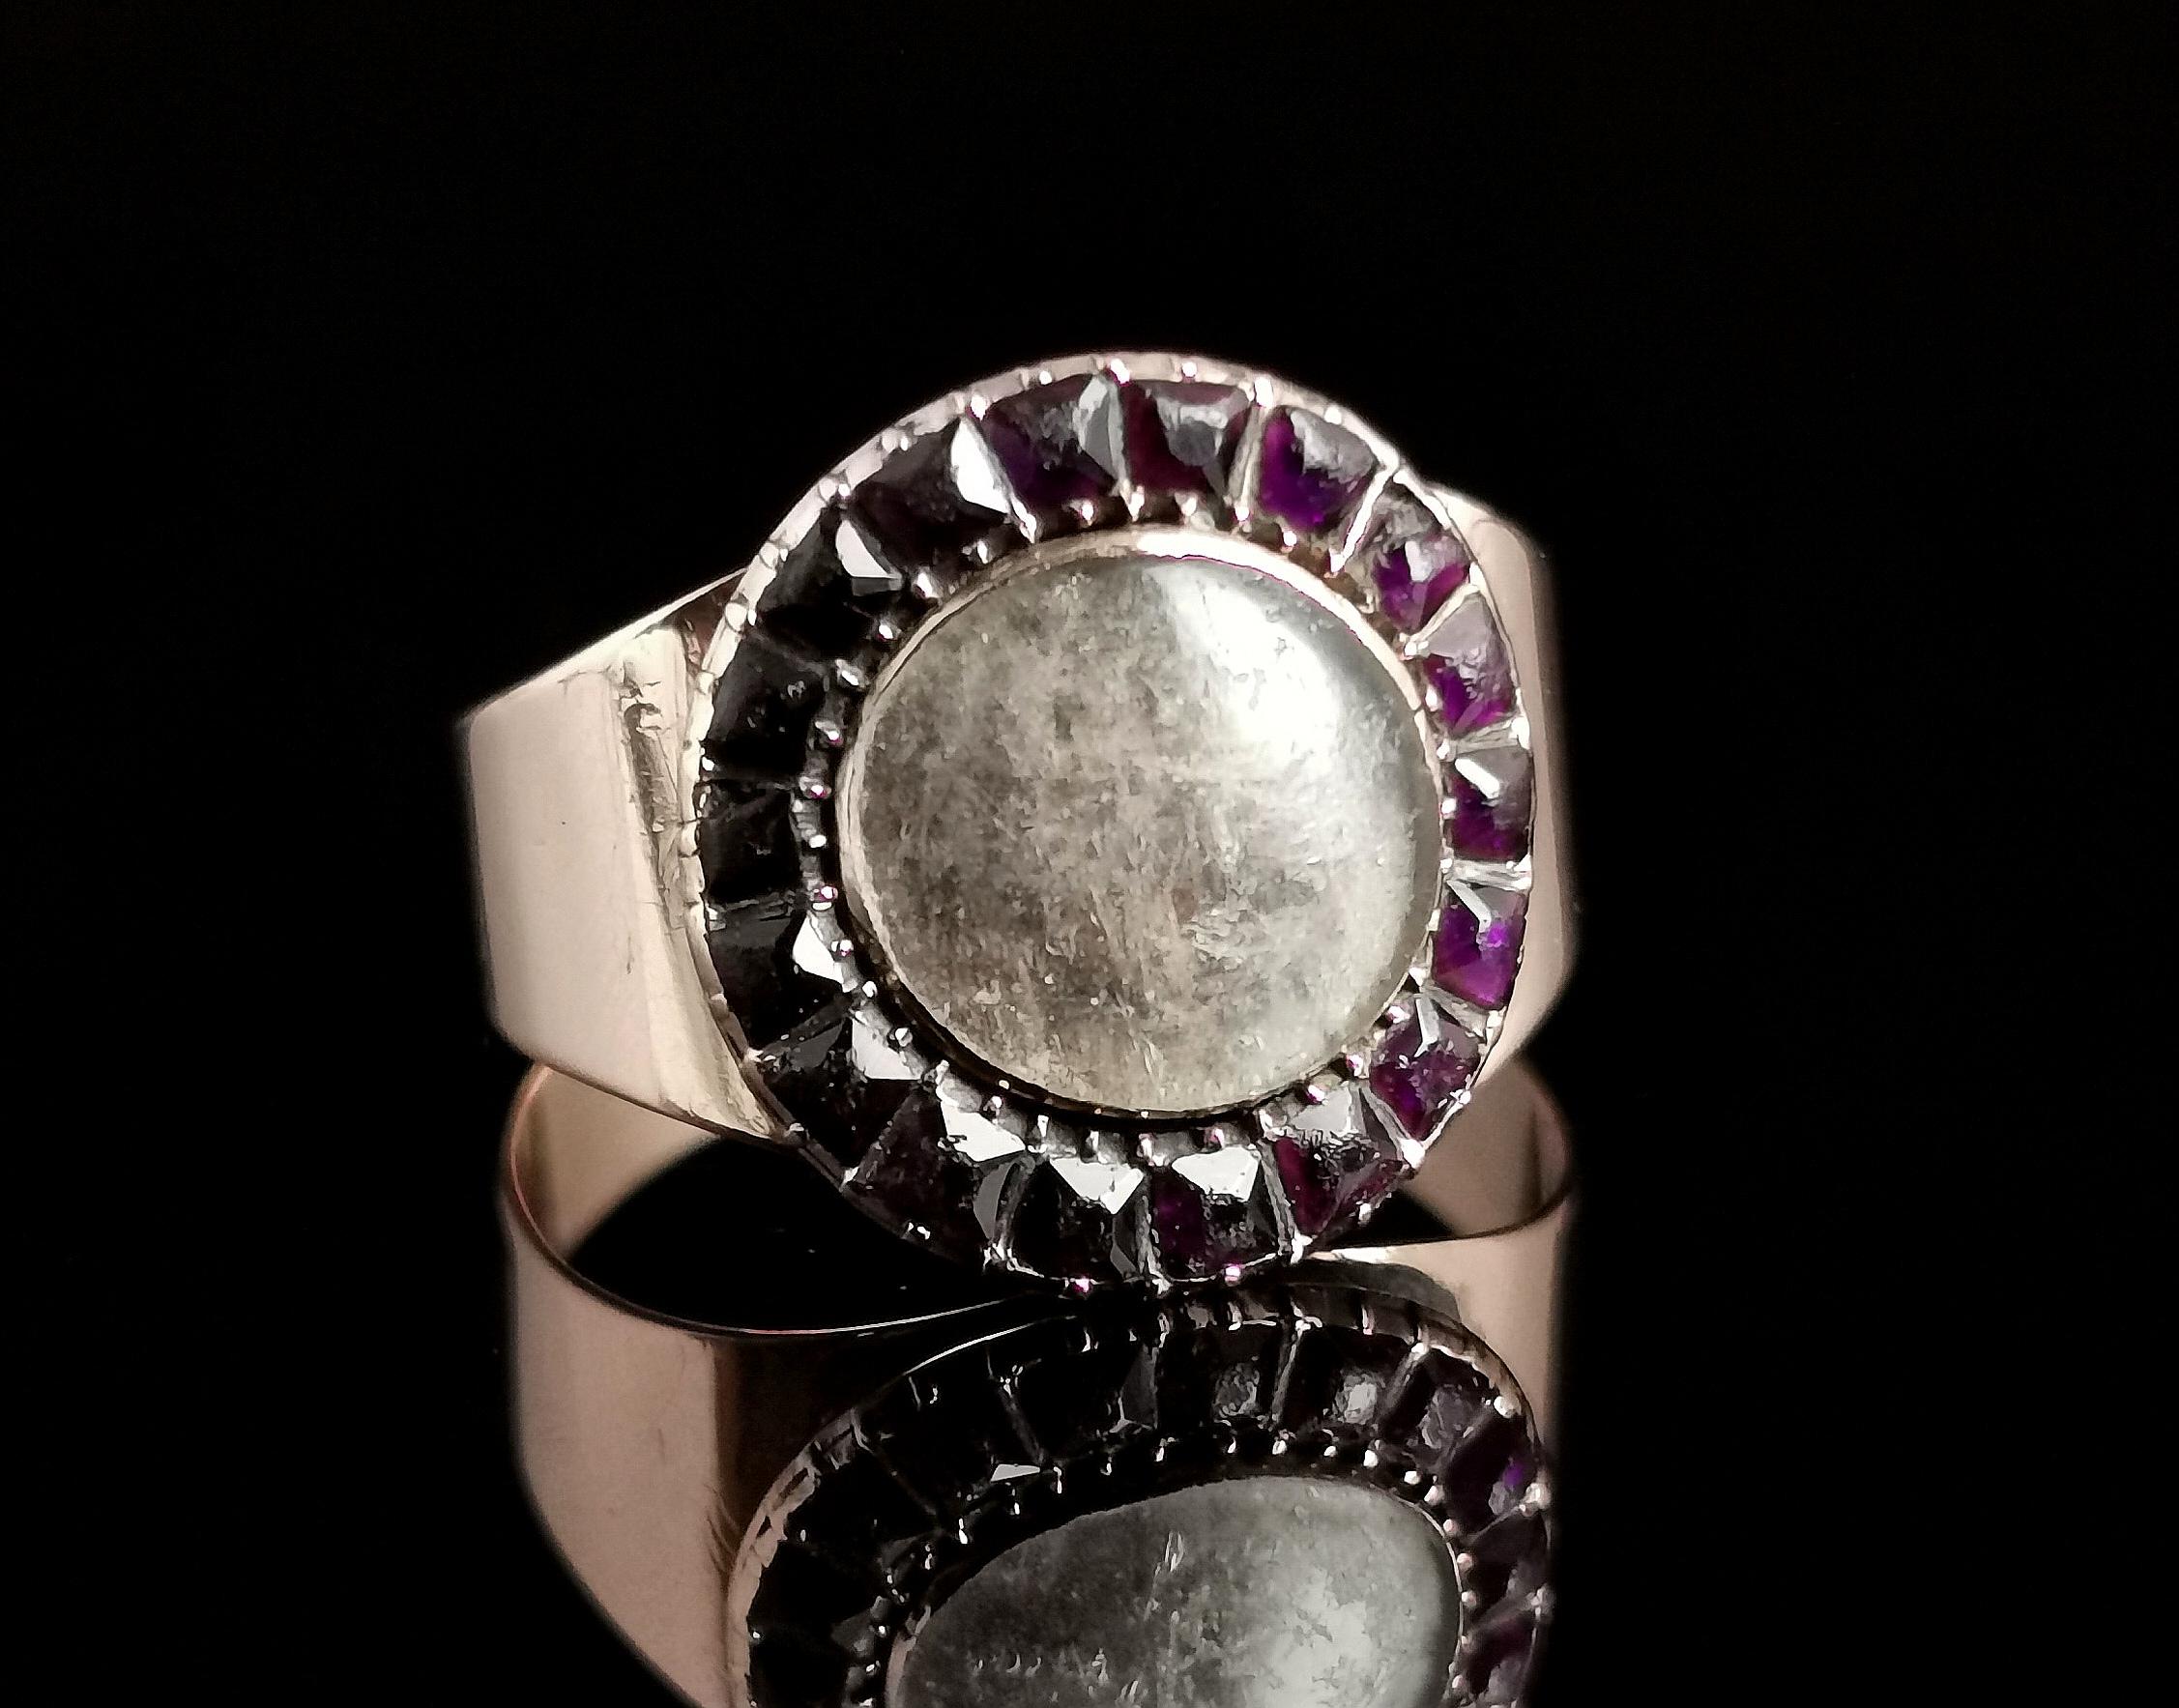 A charming antique Georgian Amethyst paste and hairwork mourning ring.

A beautiful Georgian piece in a nice design.

The face has a halo of deep purple 'Amethyst' paste stones framing the central glazed hairwork panel.

The band and shoulders are